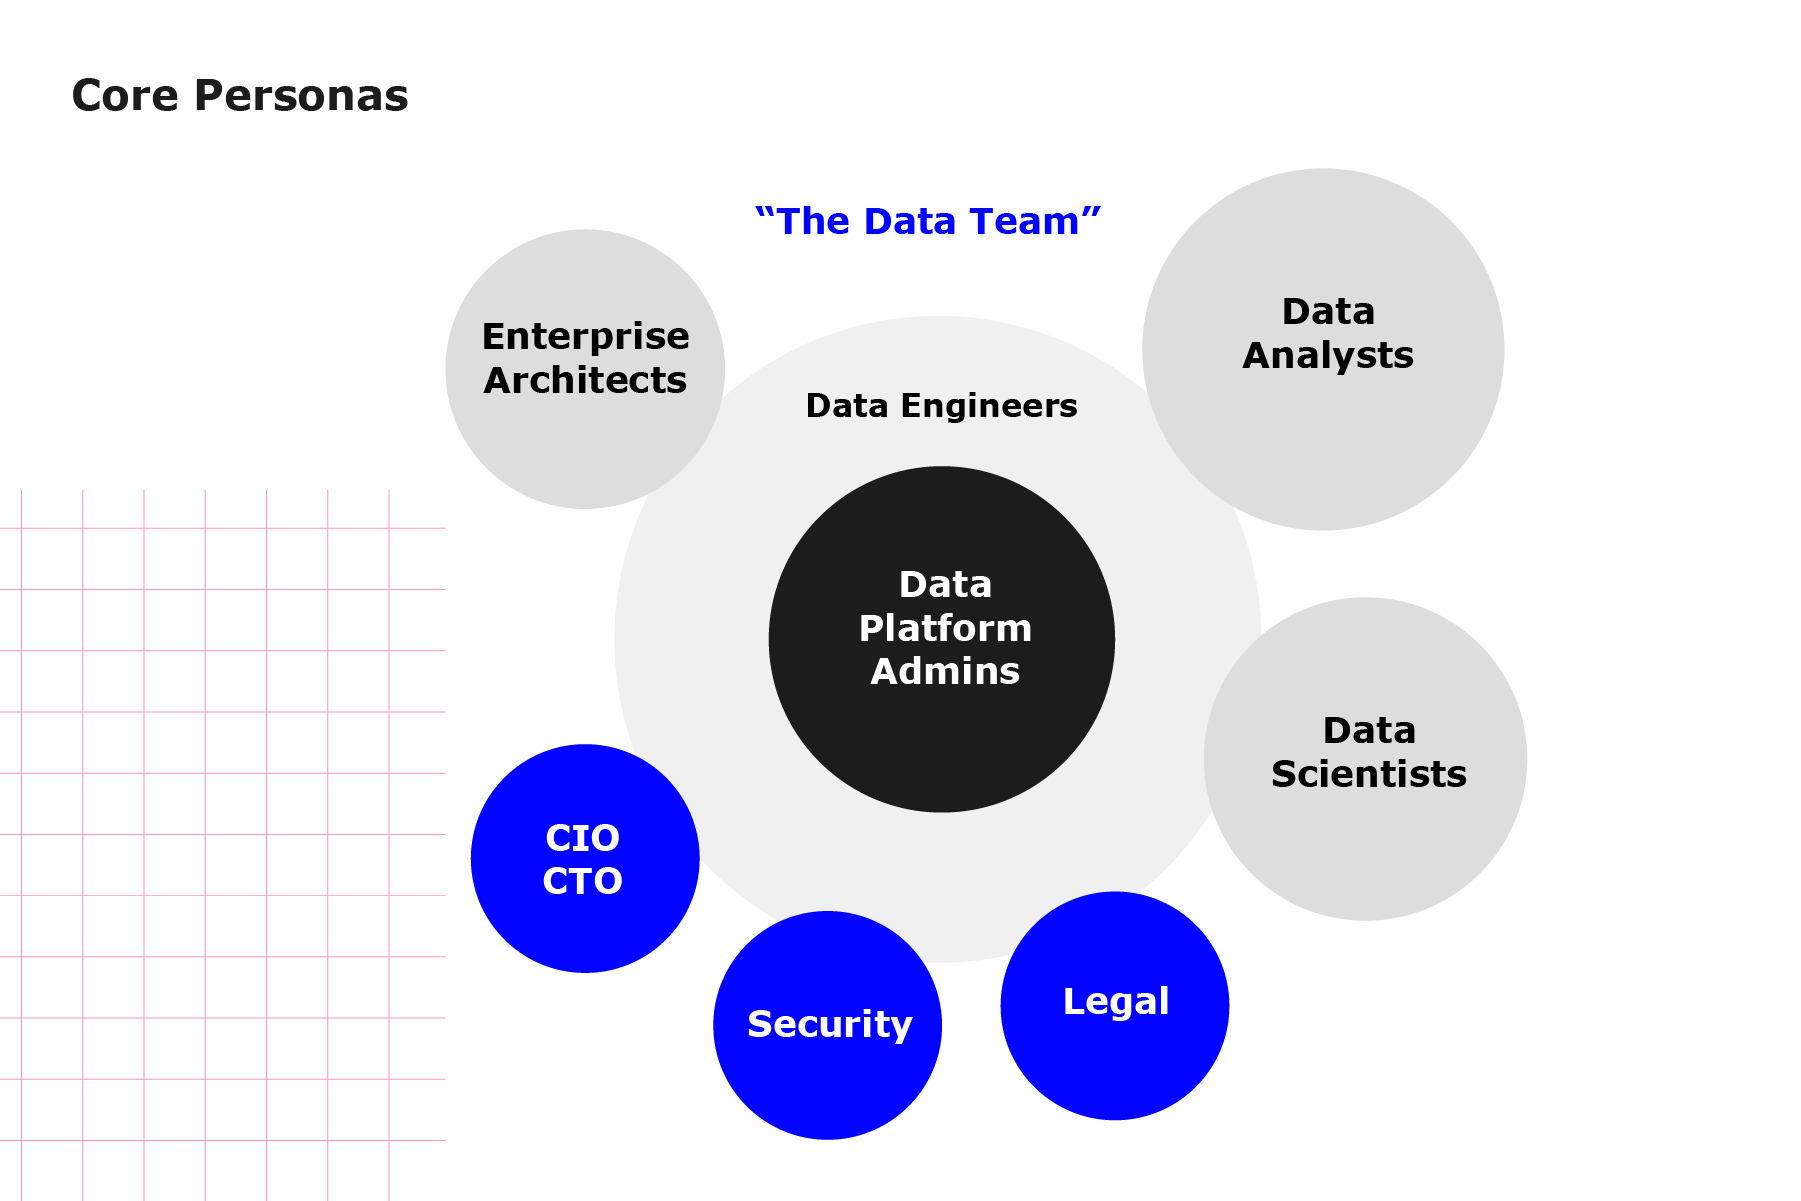 Diagrams shows the core personas (ie persons in a job profile) that are part of any data-centric business